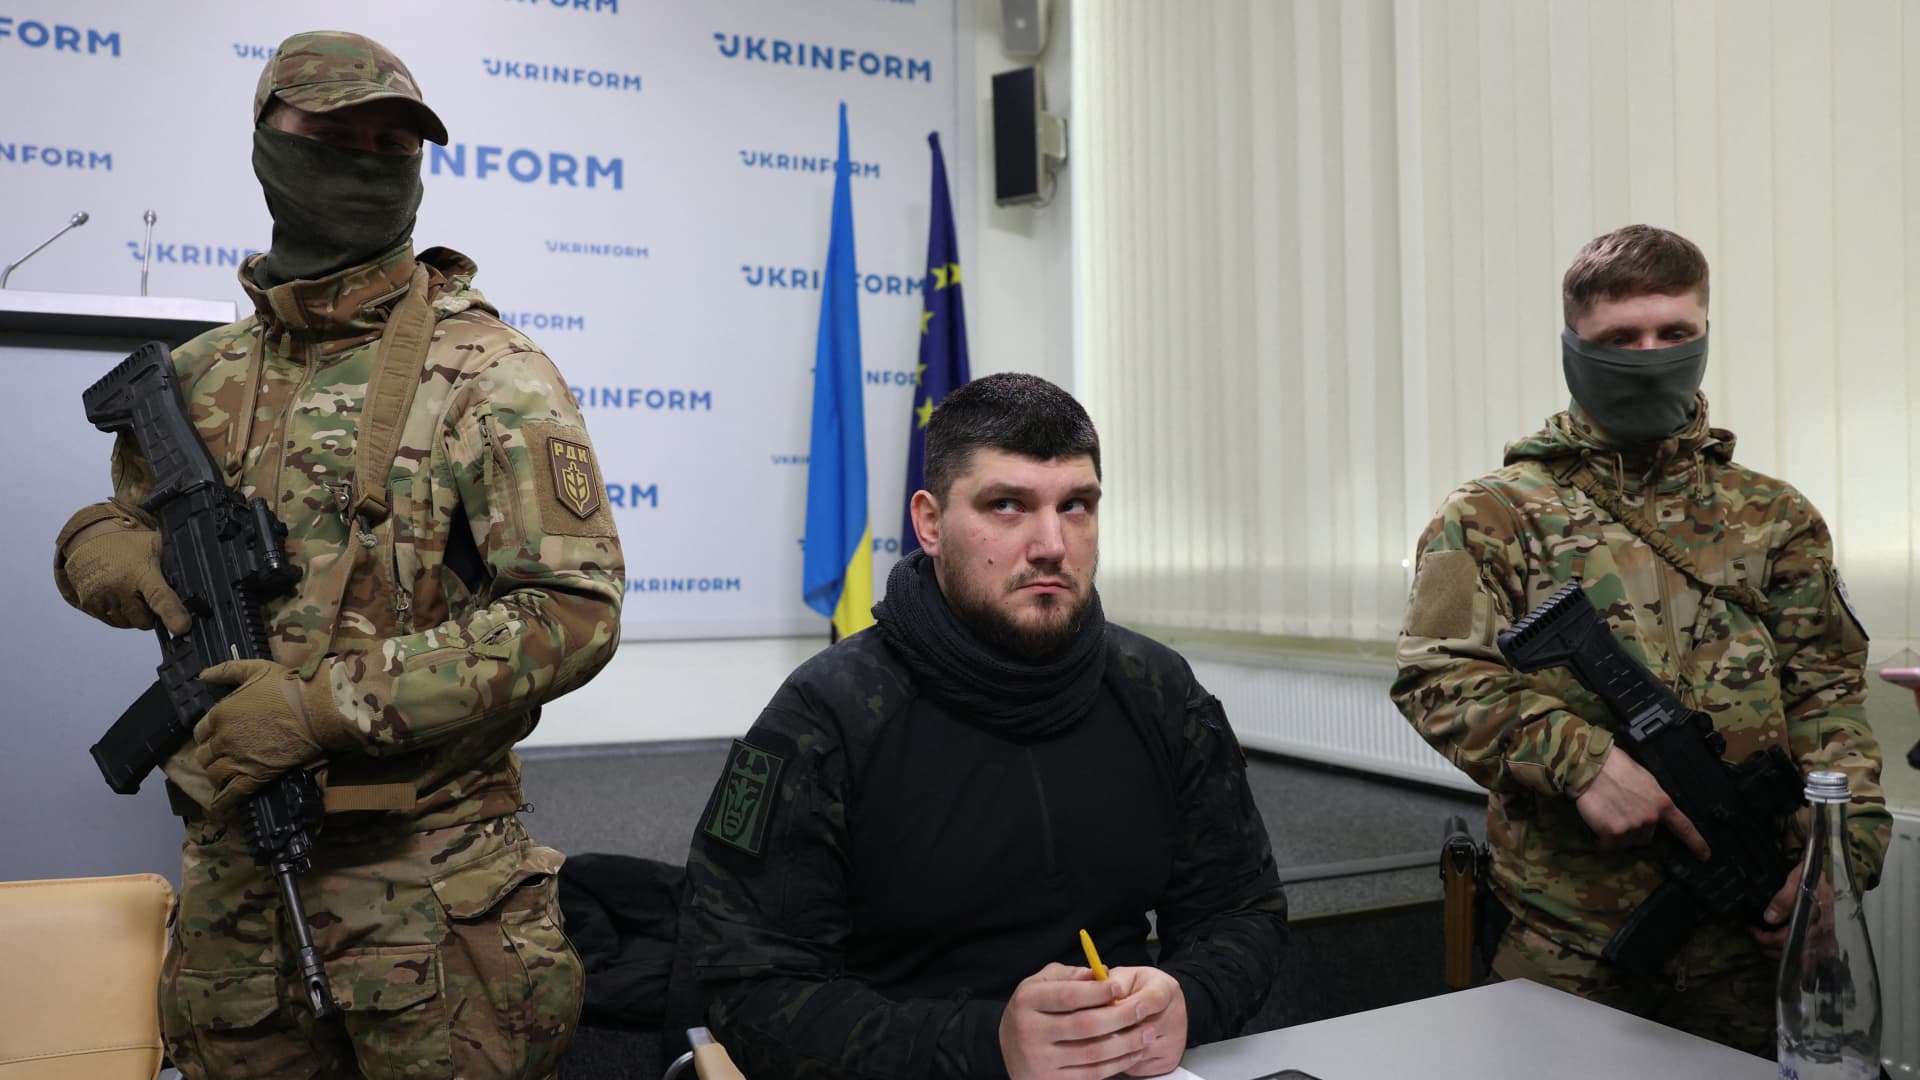 The commander and founder of the Russian Volunteer Corps, Denis 'Whiterex' together with his soldiers wait after a press conference on behalf of the Russian Liberation Forces fighting along side Ukranian forces, in Kyiv on March 21, 2024, amid the Russian invasion of Ukraine. 